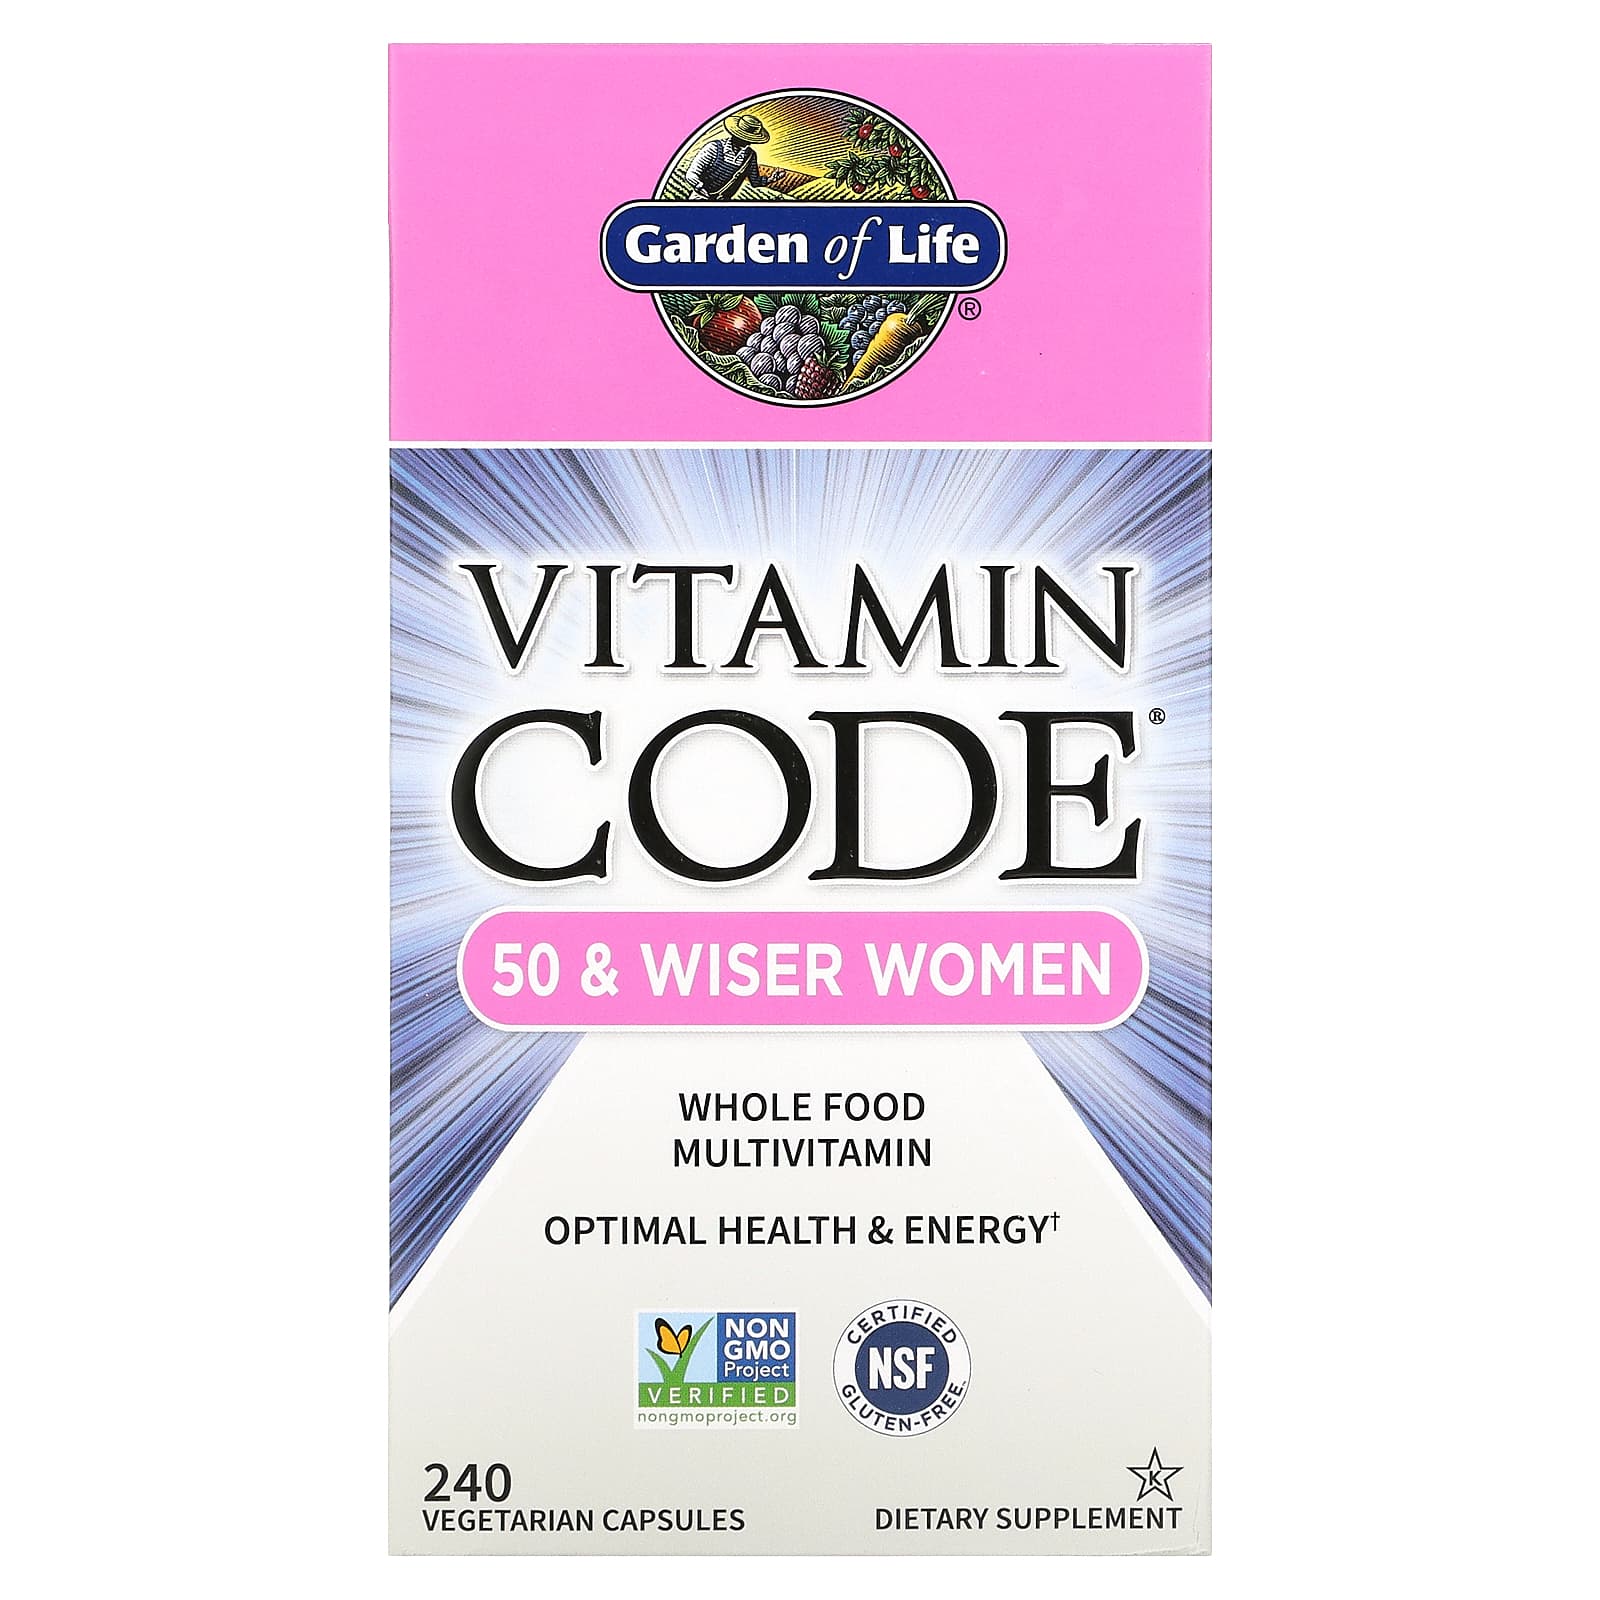 Cats, Dogs and promo code for iherb 2021